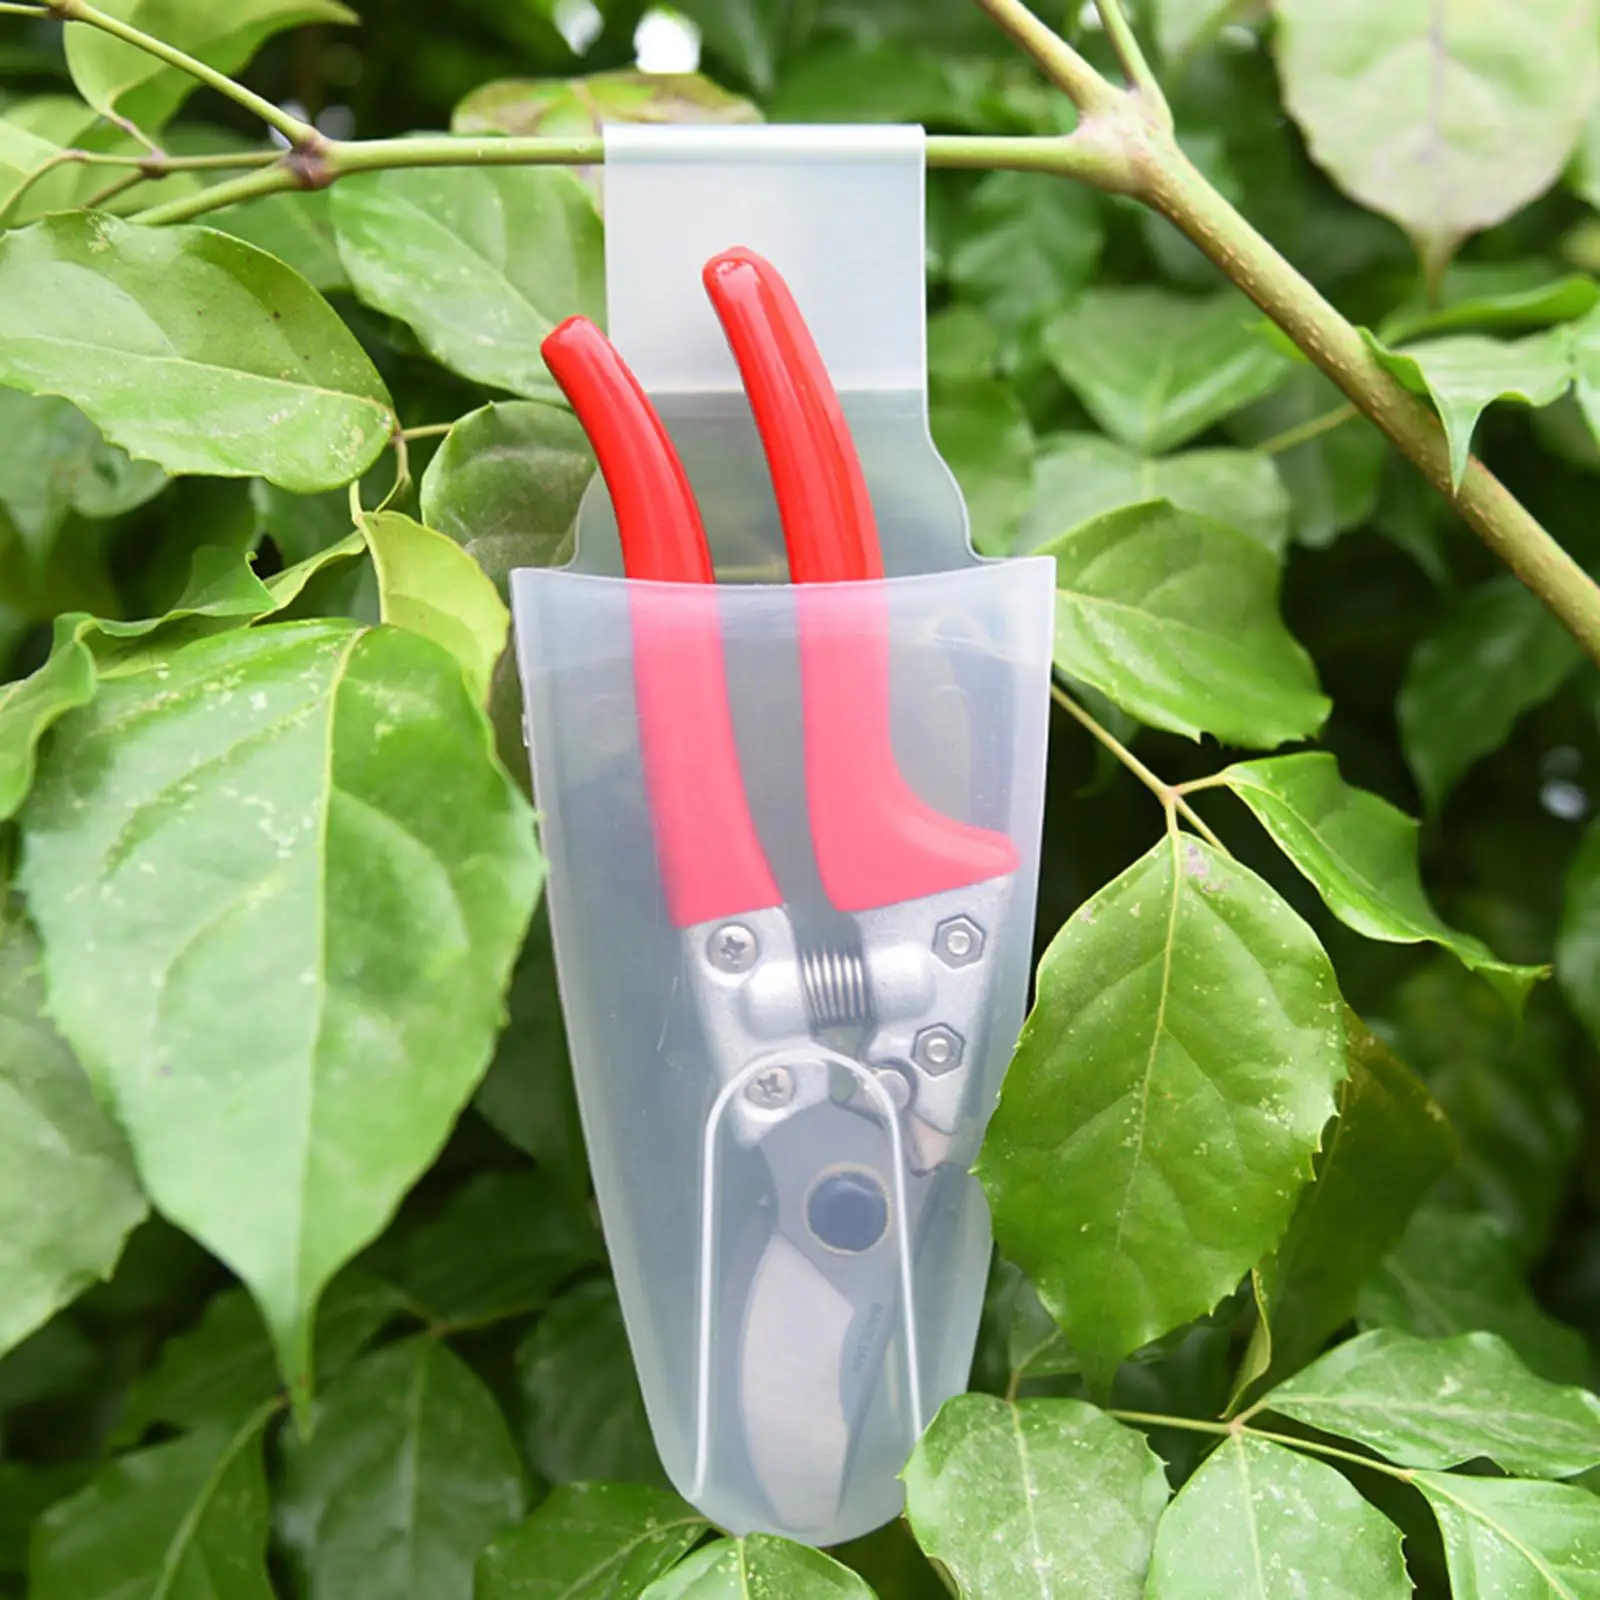 Transparent Scissors Storage Box Gardening Waist Case for Clippers Shears